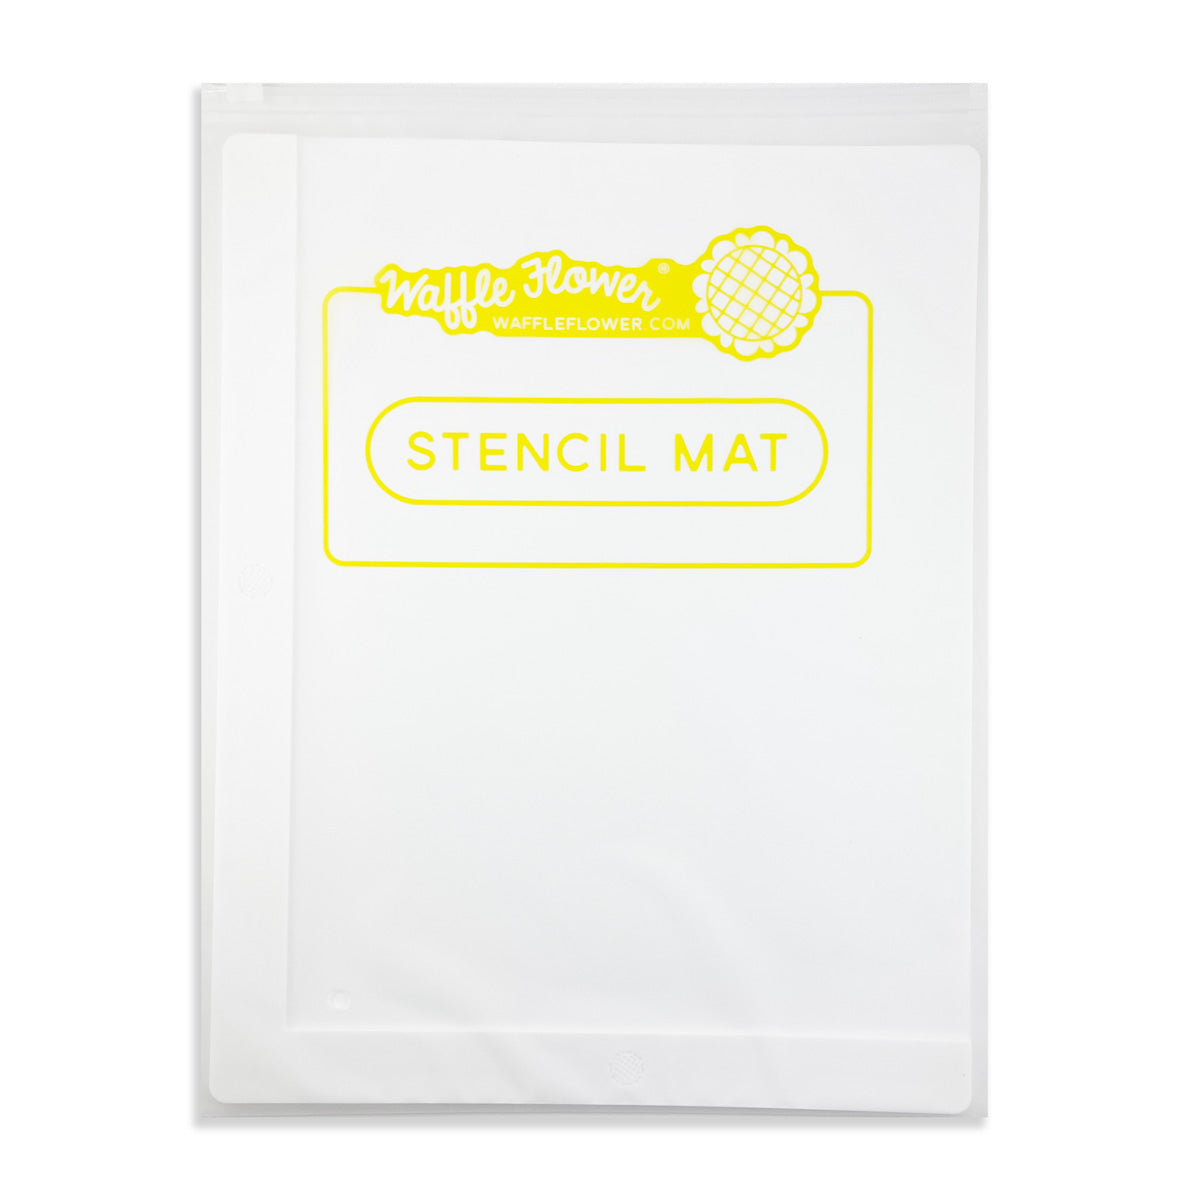 Silicone Mat For Crafts - The Stampin Up Silicone Craft Sheet